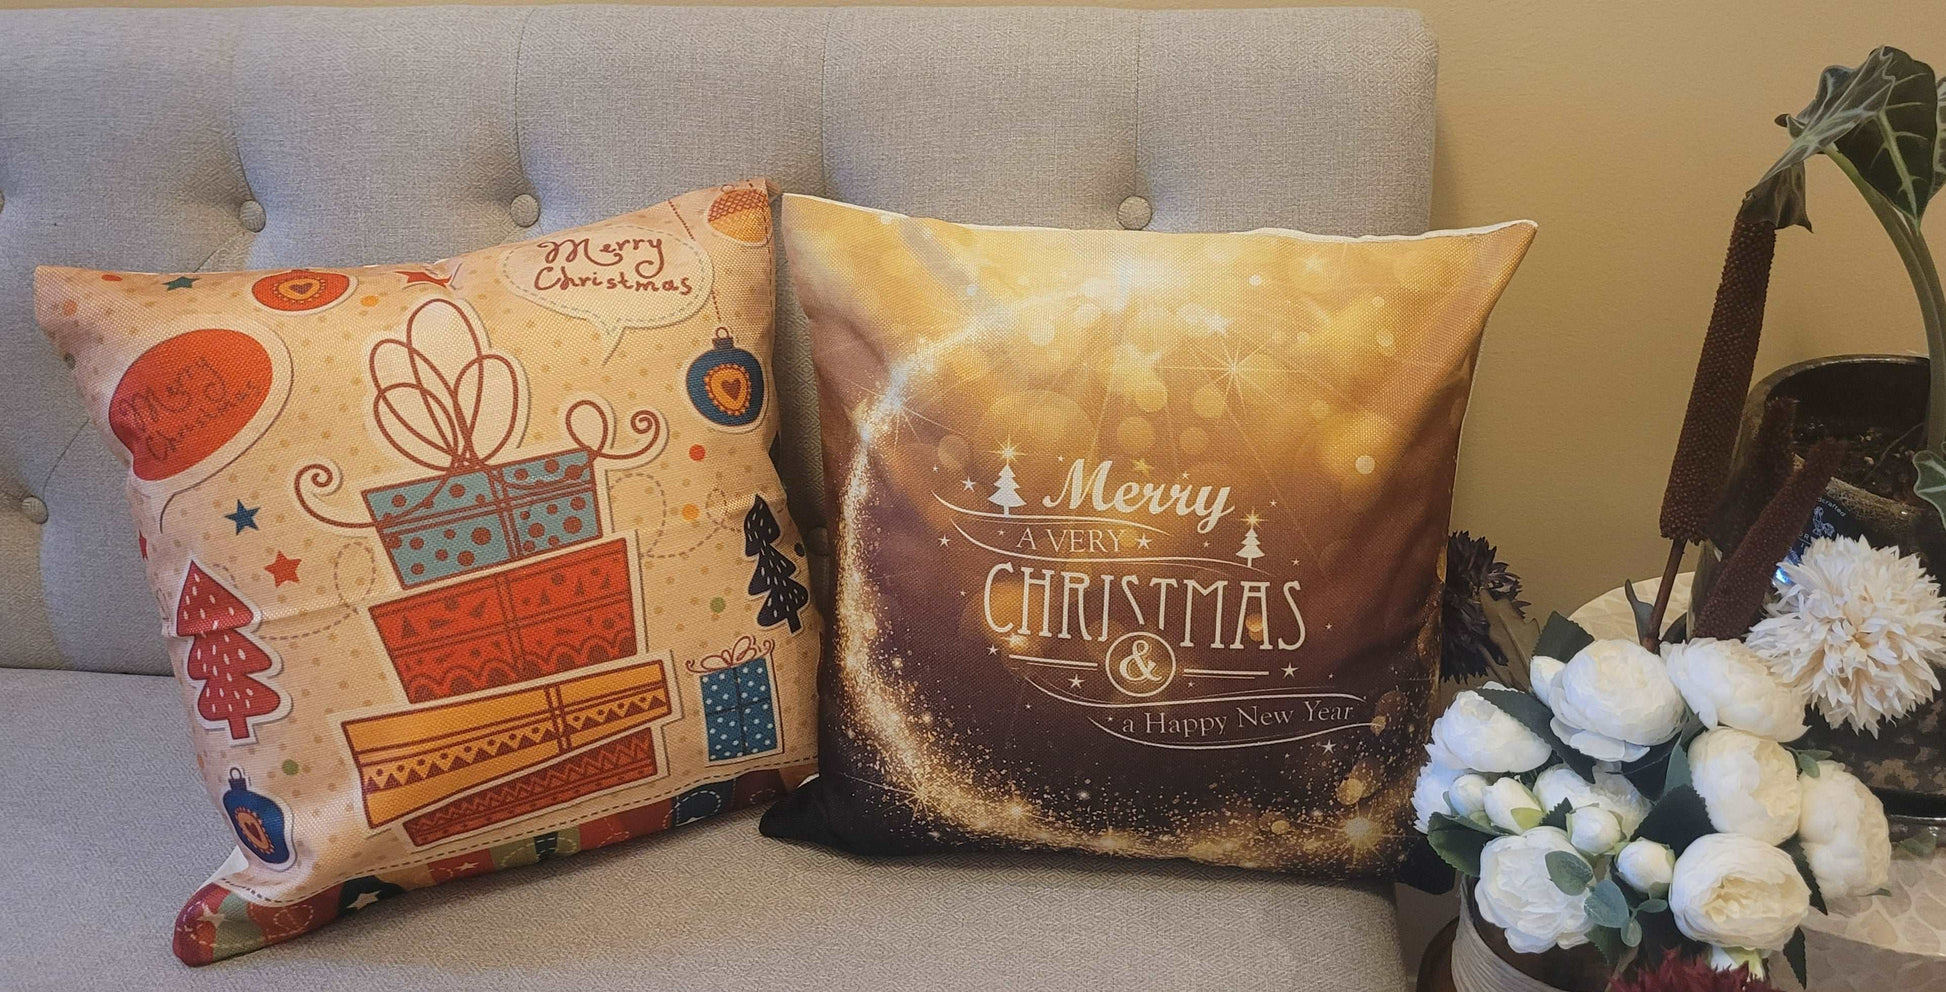 Jossiomi Decorative Christmas Gift Boxes and Stars Cushion Covers